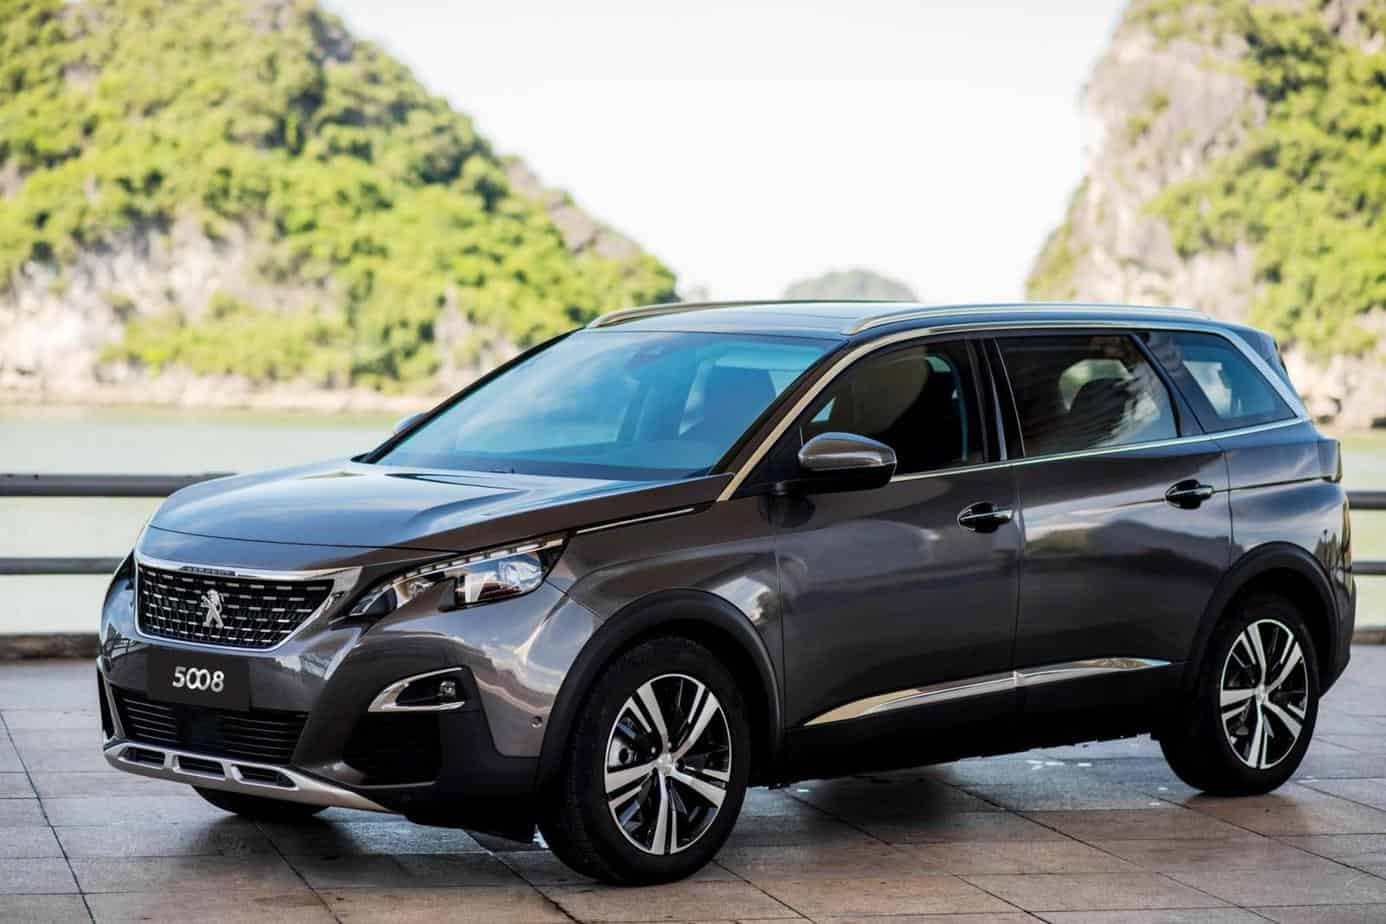 Finding a Reputable Peugeot Car Repair and Maintenance Center is Very Necessary